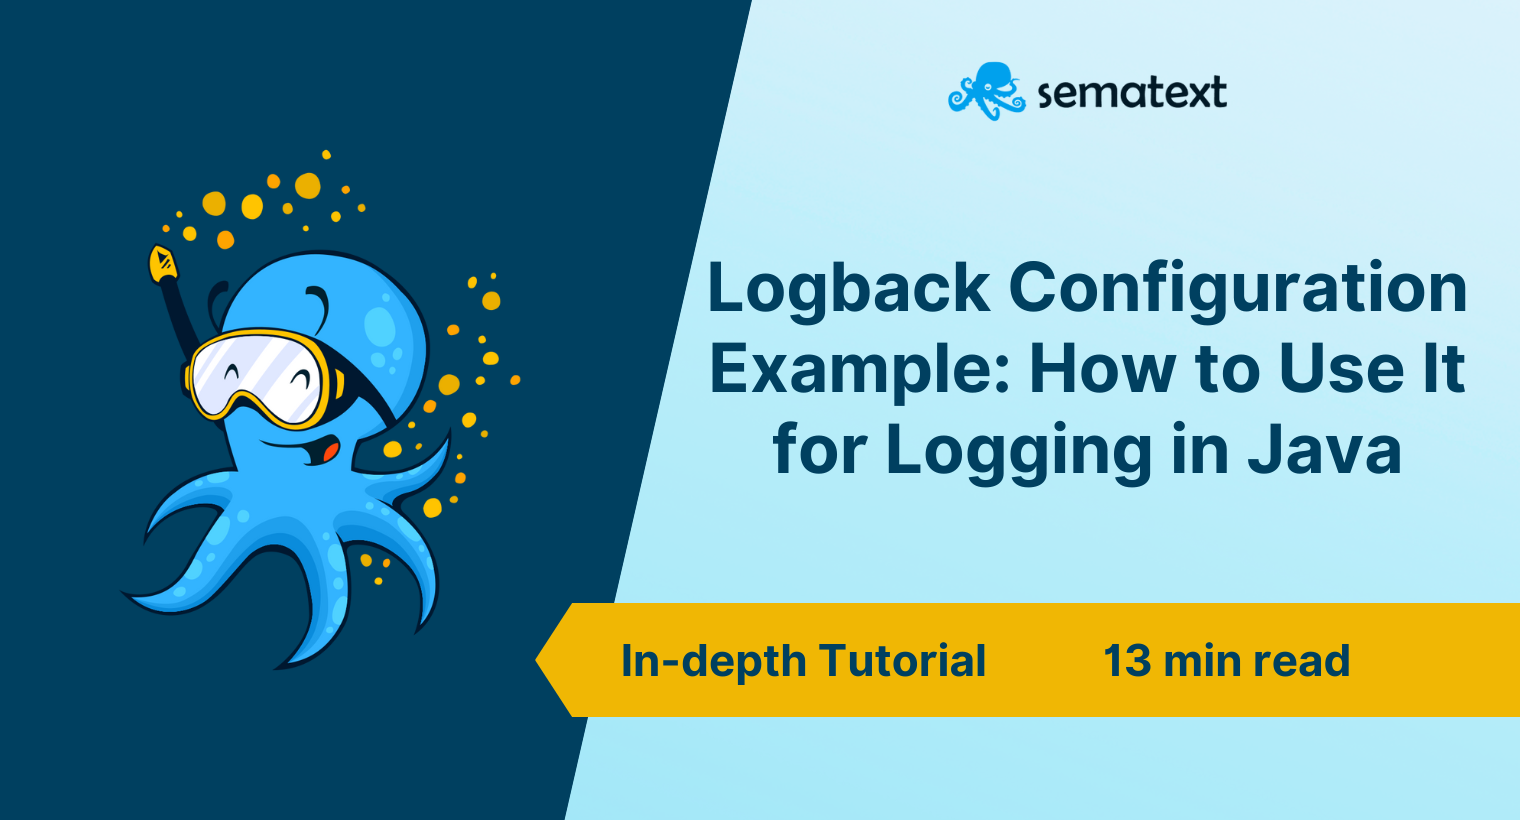 Logback Configuration Example: Tutorial on How to Use It for Logging in Java